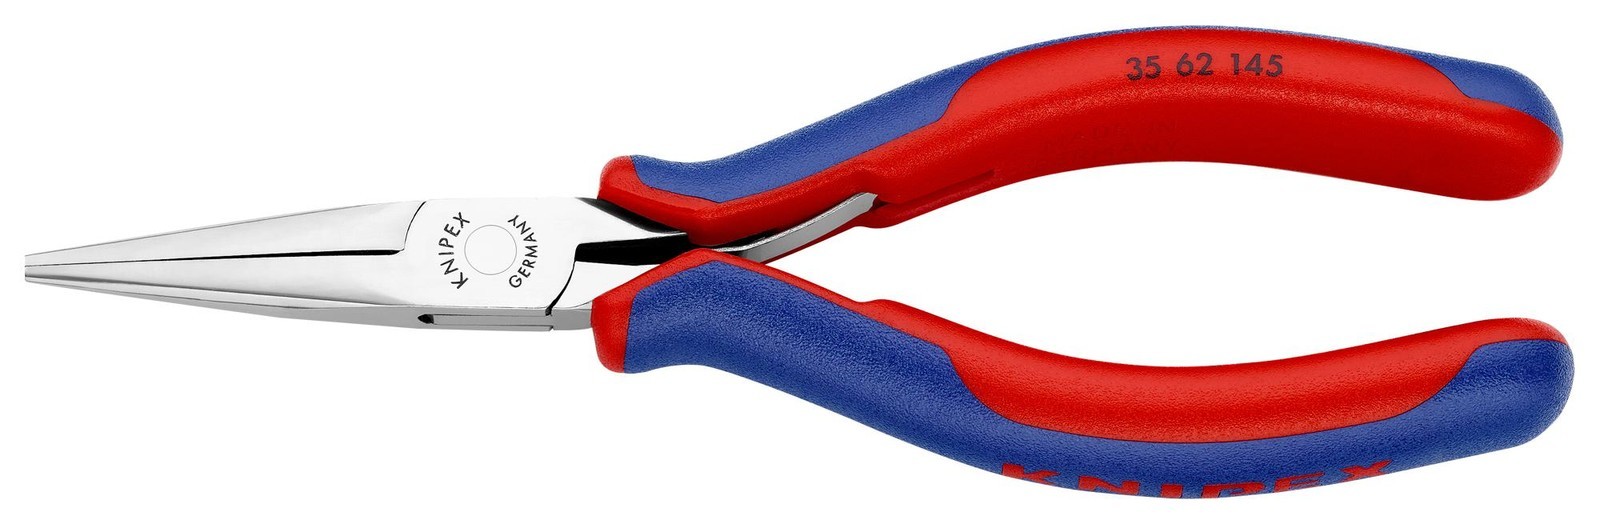 Knipex 35 62 145 Relay Adjusting Pliers